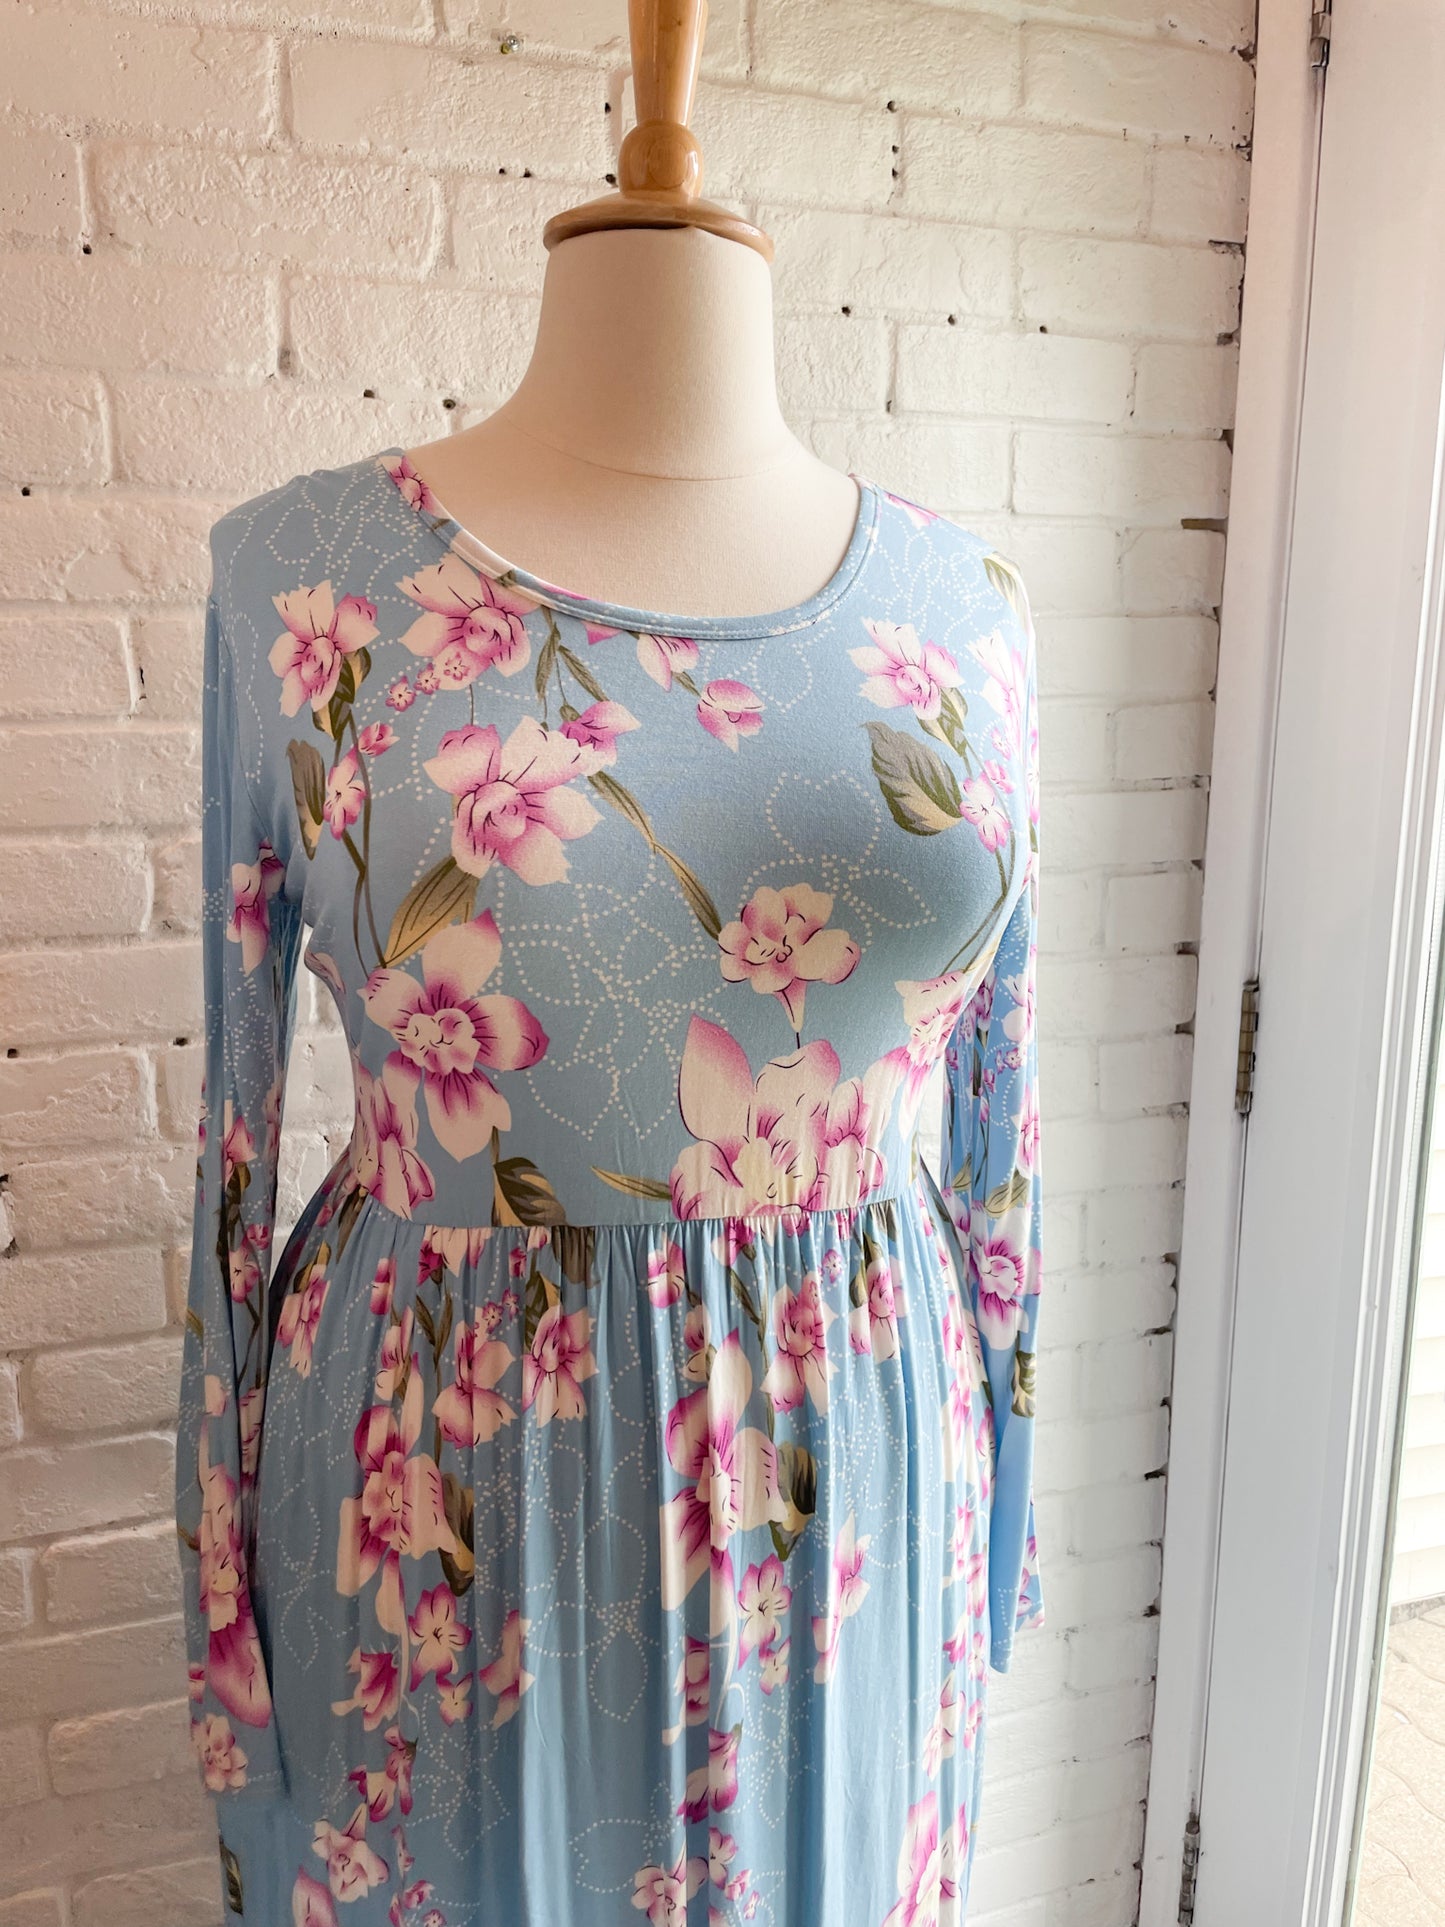 Bishuige Long Sleeved Sky Blue Floral Maxi Dress NWT - XL/2XL